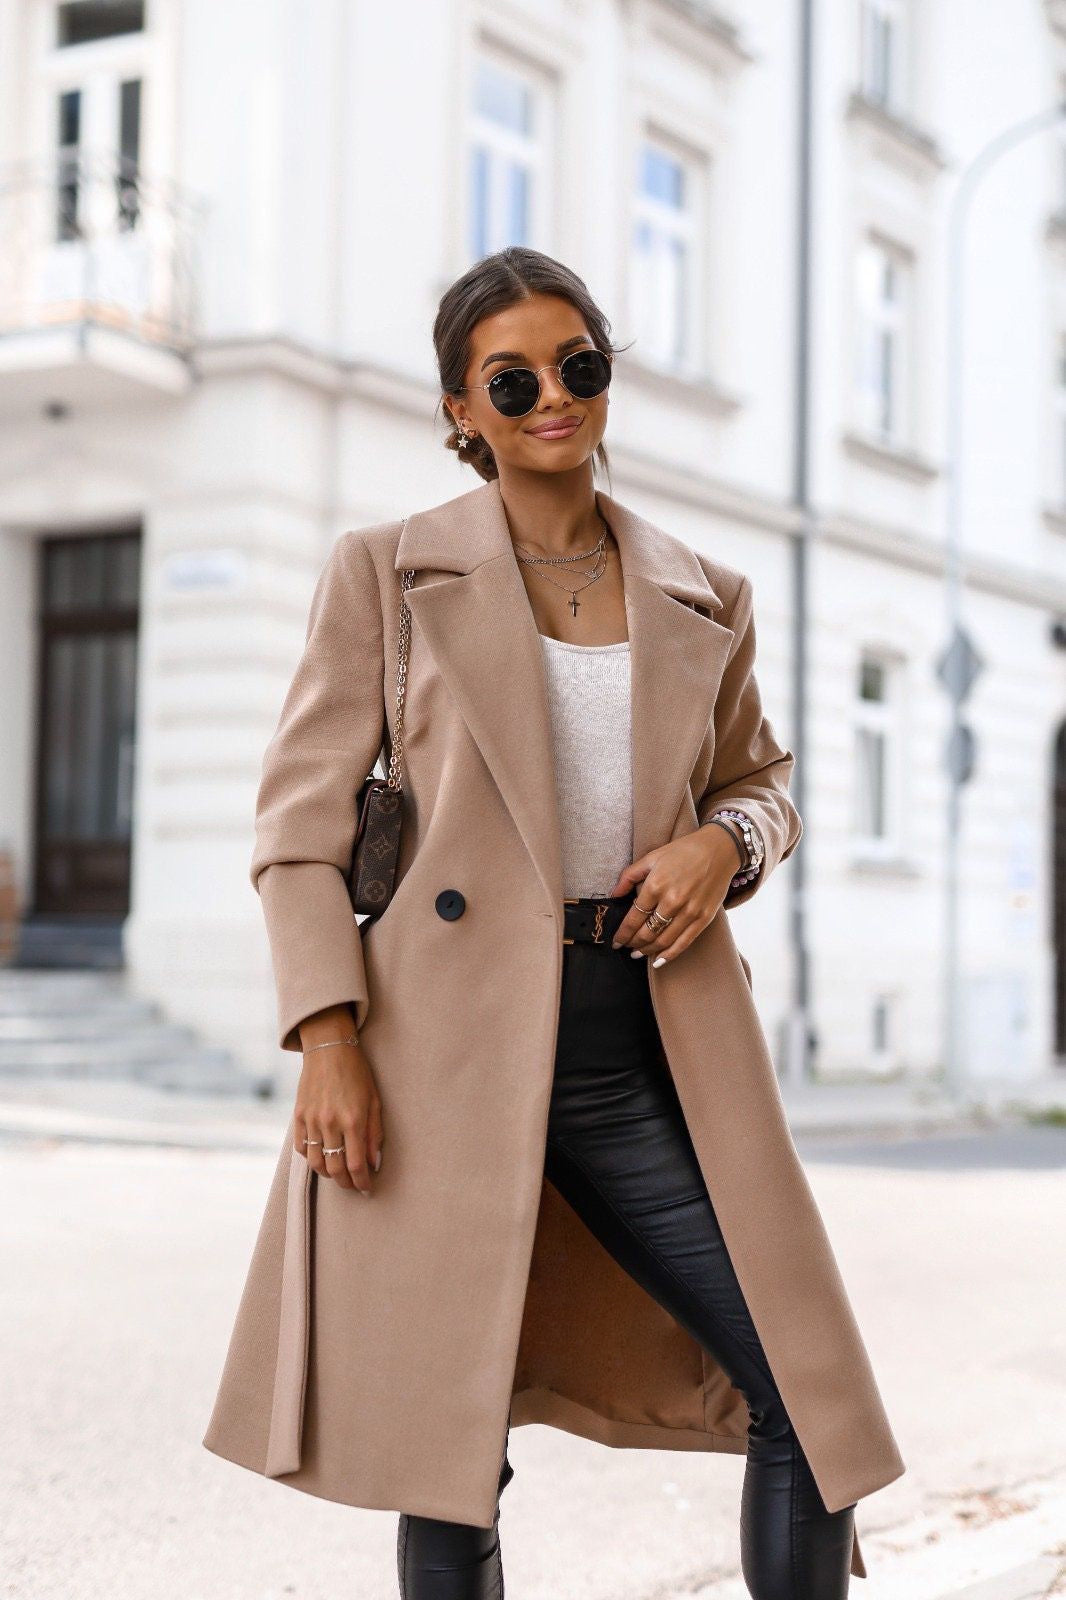 Winter Outfits | New York Aesthetic Chic Trench Coat